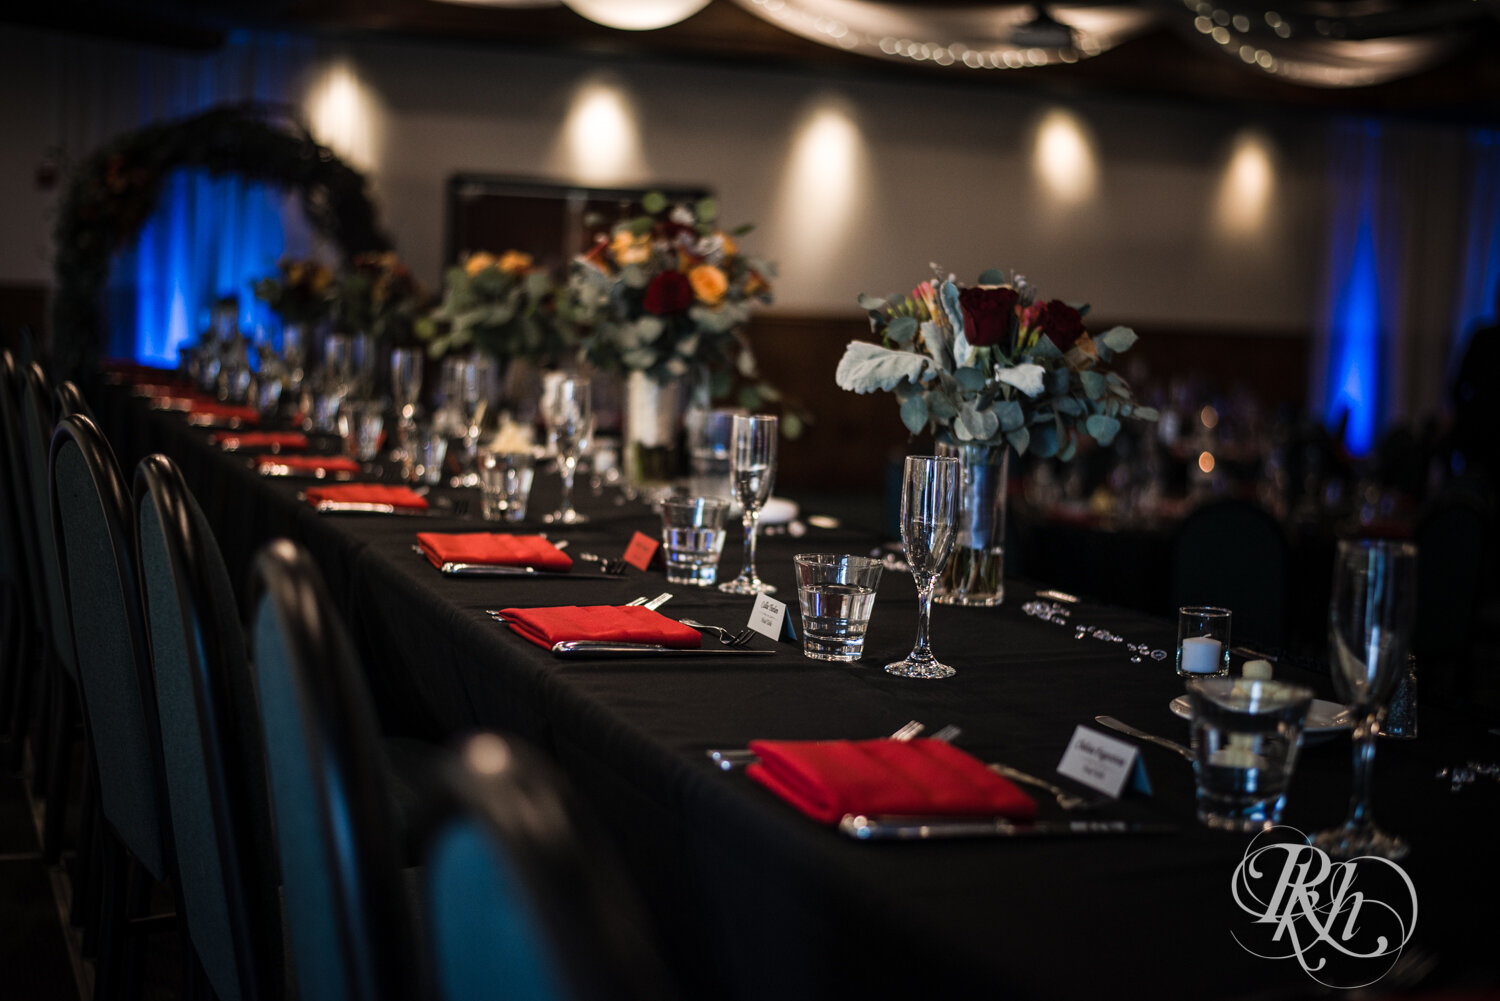 Indoor wedding reception setup with black tablecloth and red accents at Rockwoods in Otsego, Minnesota.